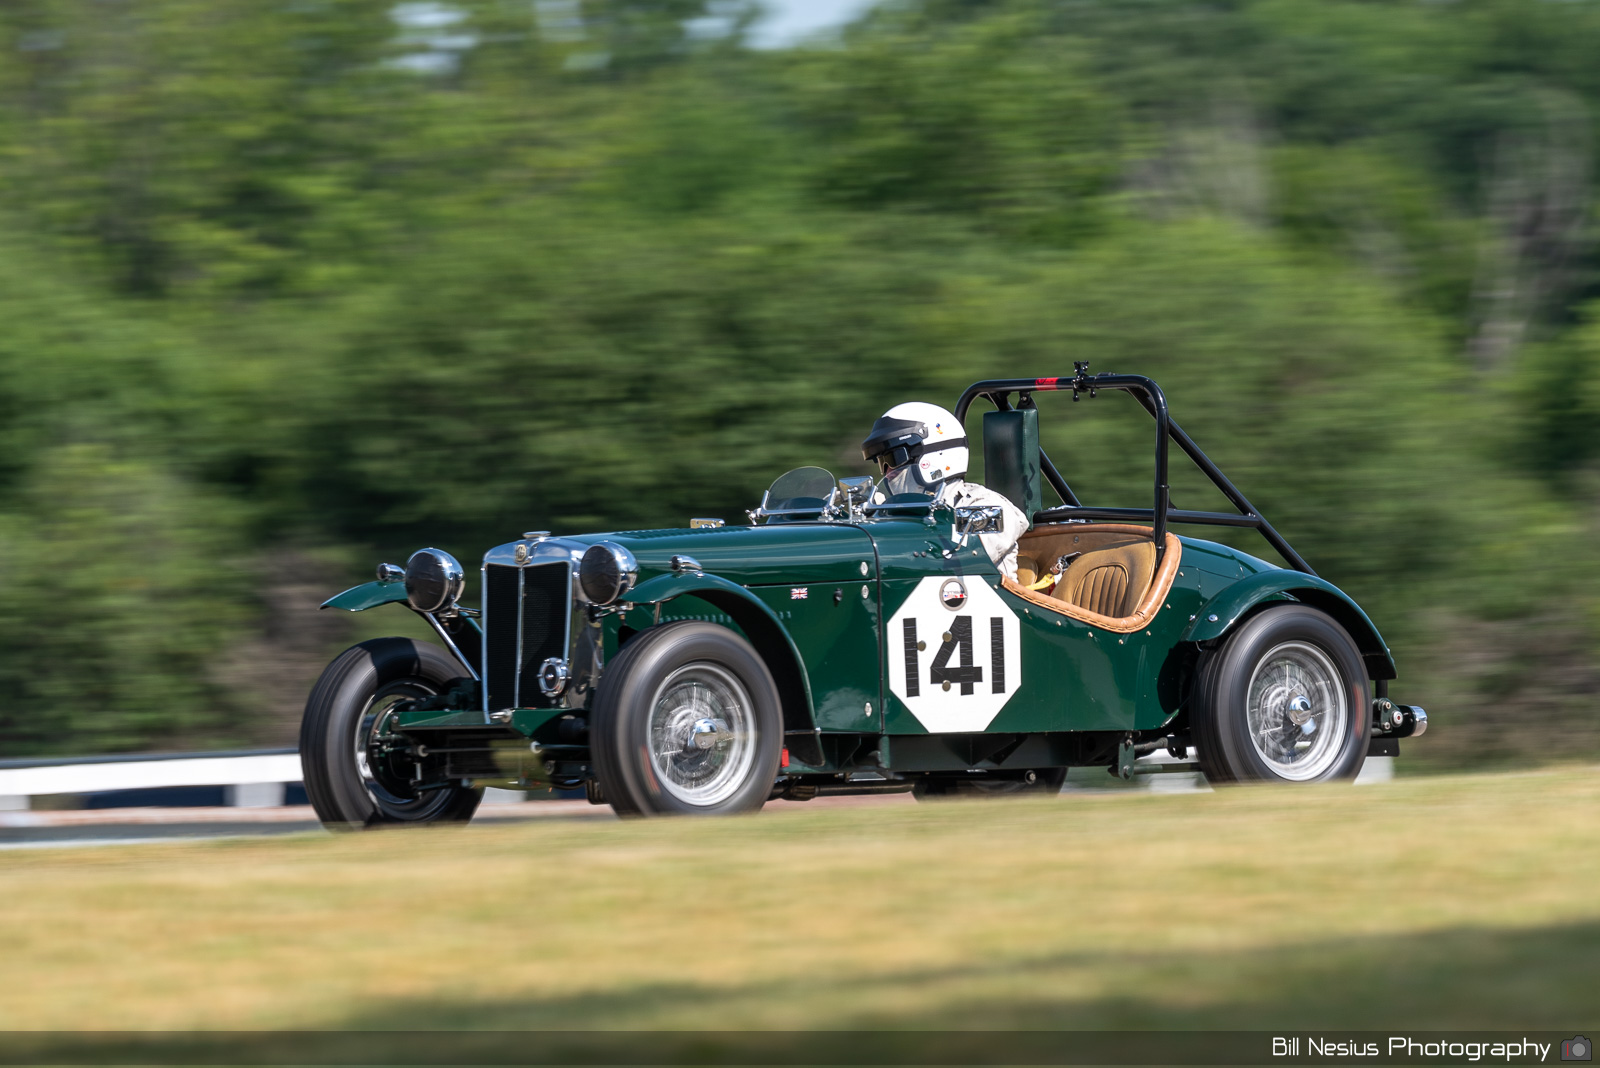 1952 MG TF Number 141 / DSC_0528 / 3